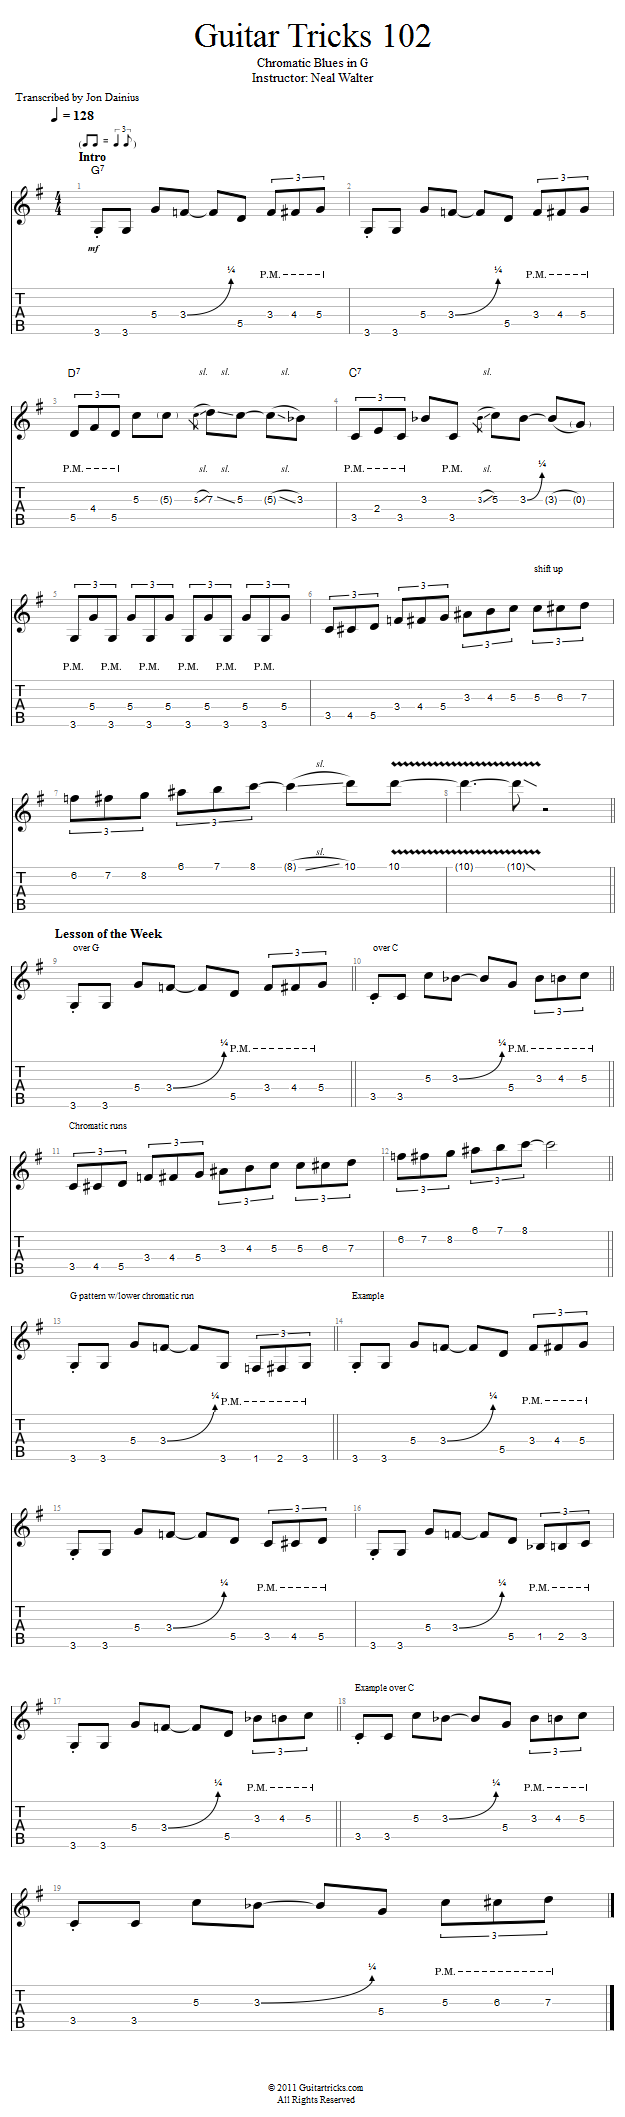 Guitar Tricks 102: Chromatic Blues in G song notation